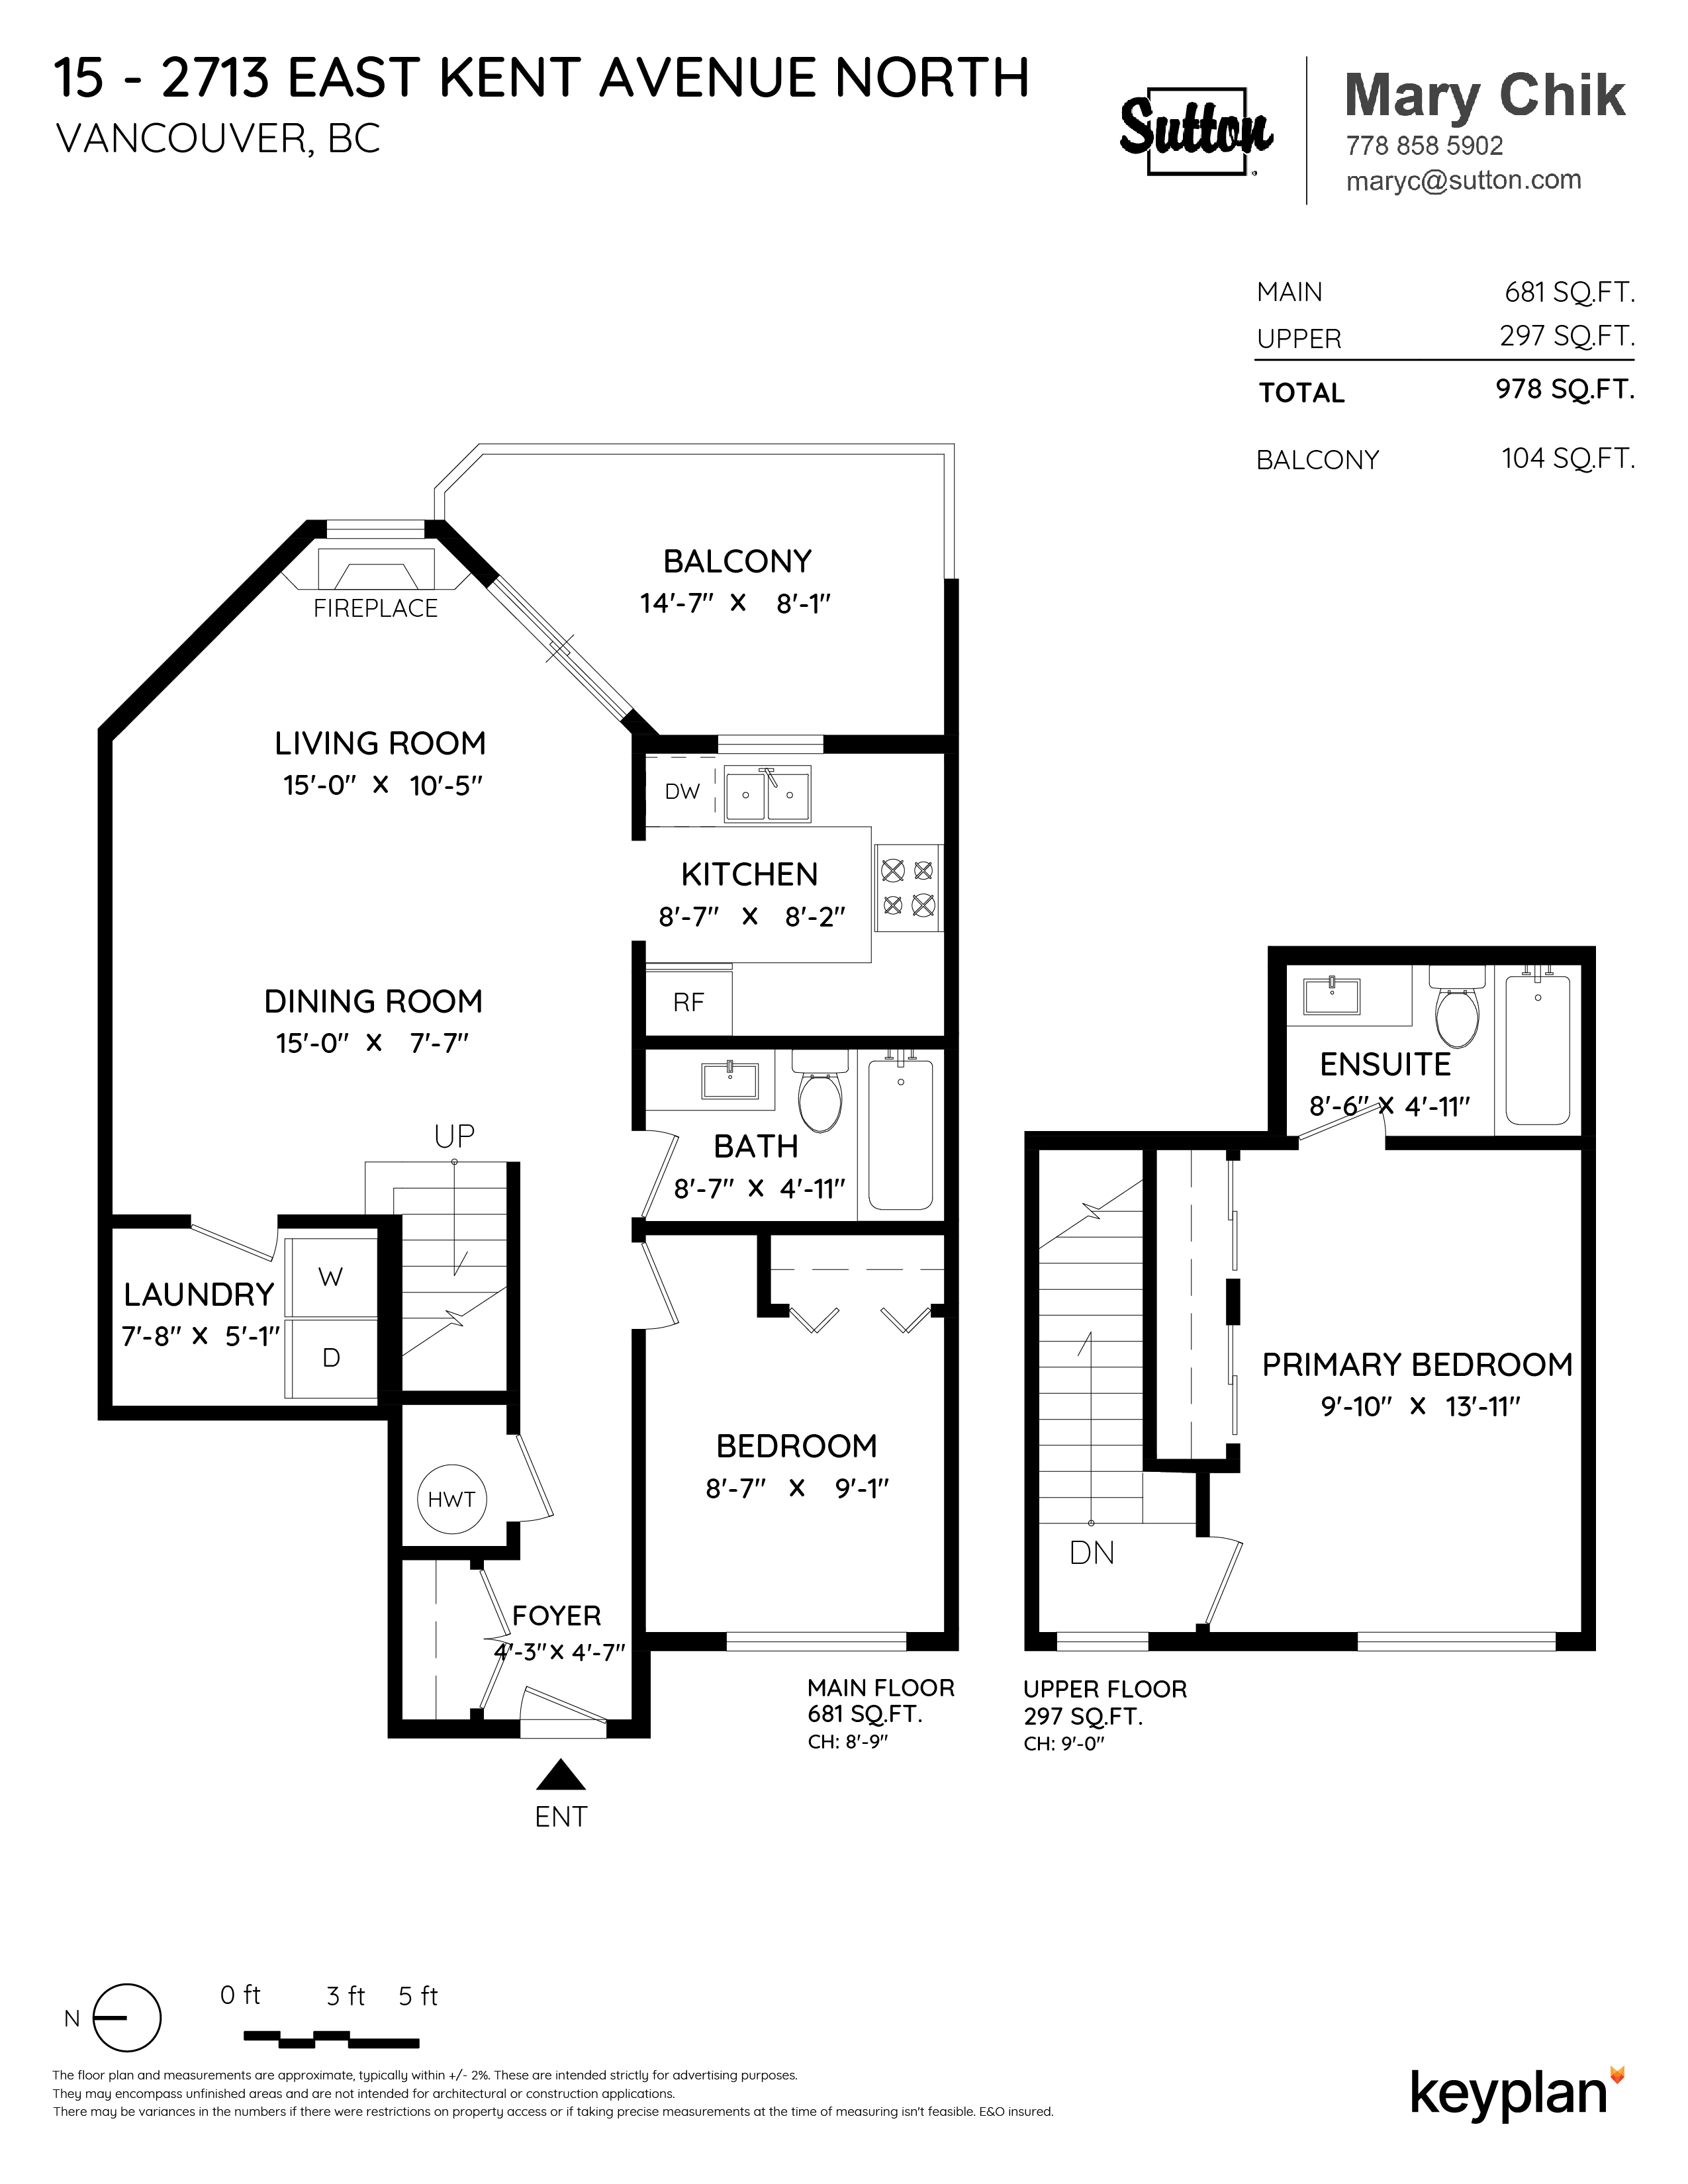 Mary Chik - Unit 15 - 2713 East Kent Avenue North, Vancouver, BC, Canada | Floor Plan 1